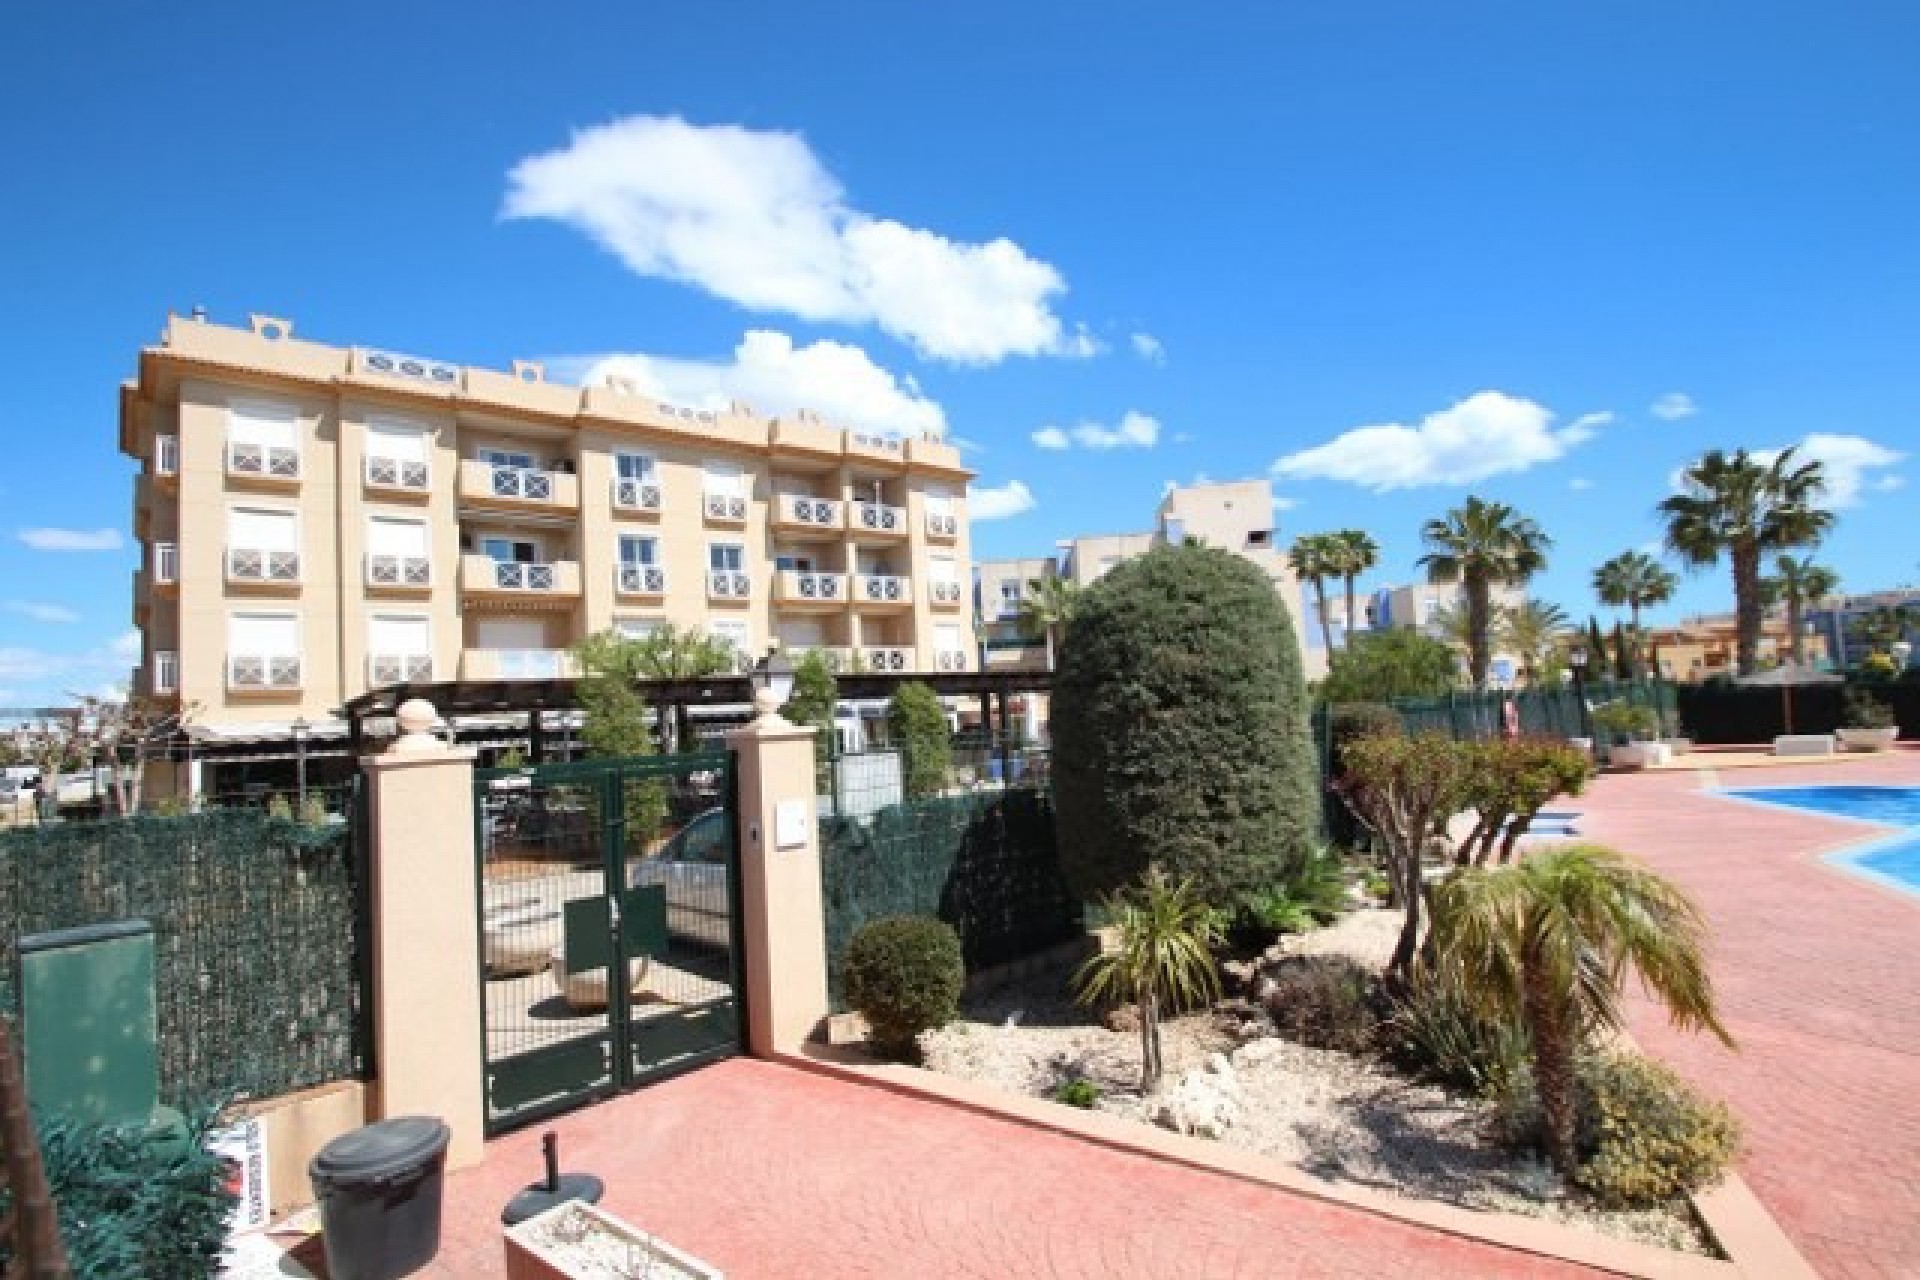 2 bedroom apartment / flat for sale in Cabo Roig, Costa Blanca